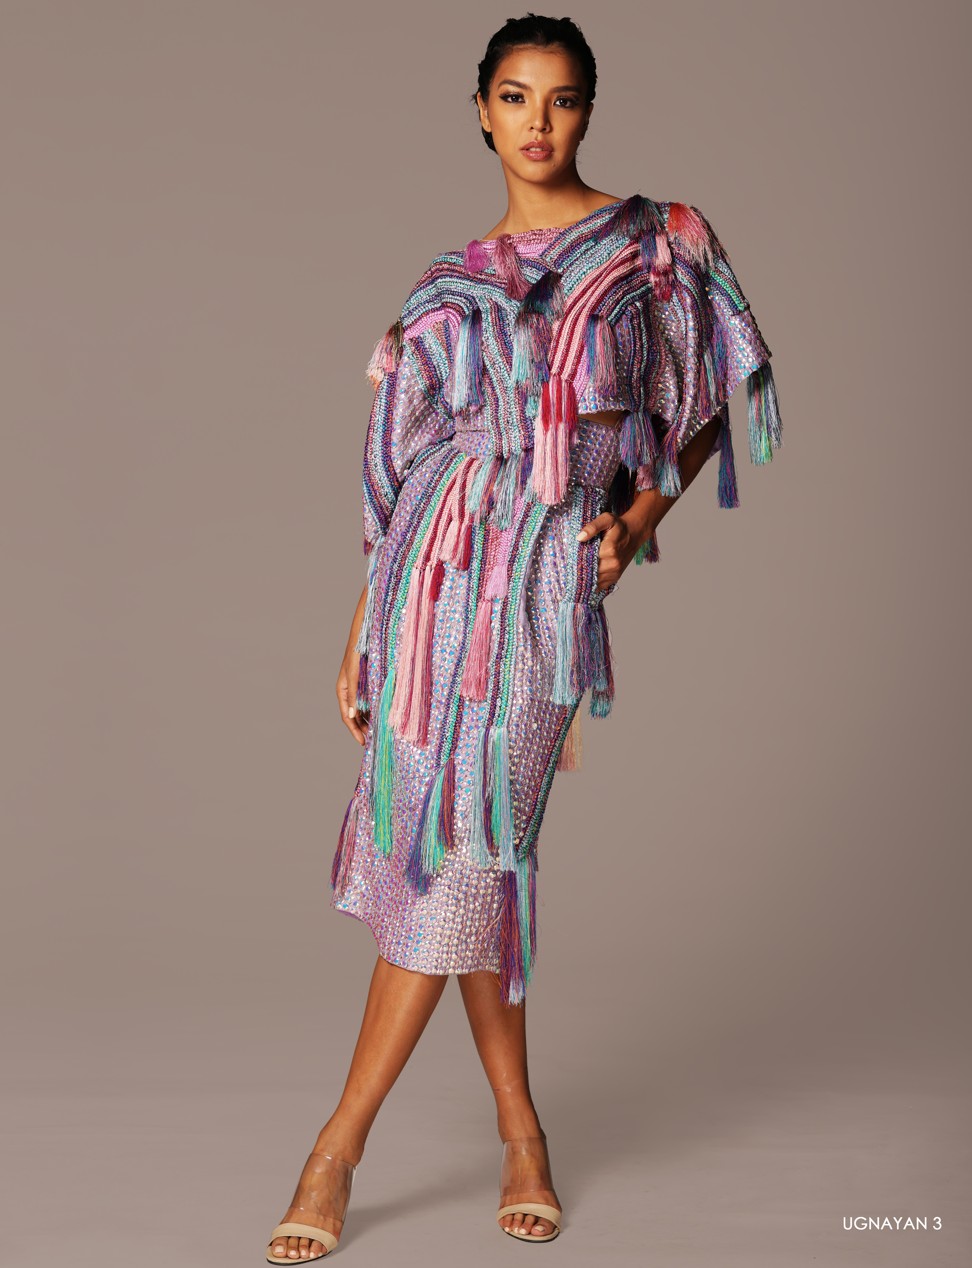 Rajo Laurel uses vibrant colours and materials to come up with innovative designs.